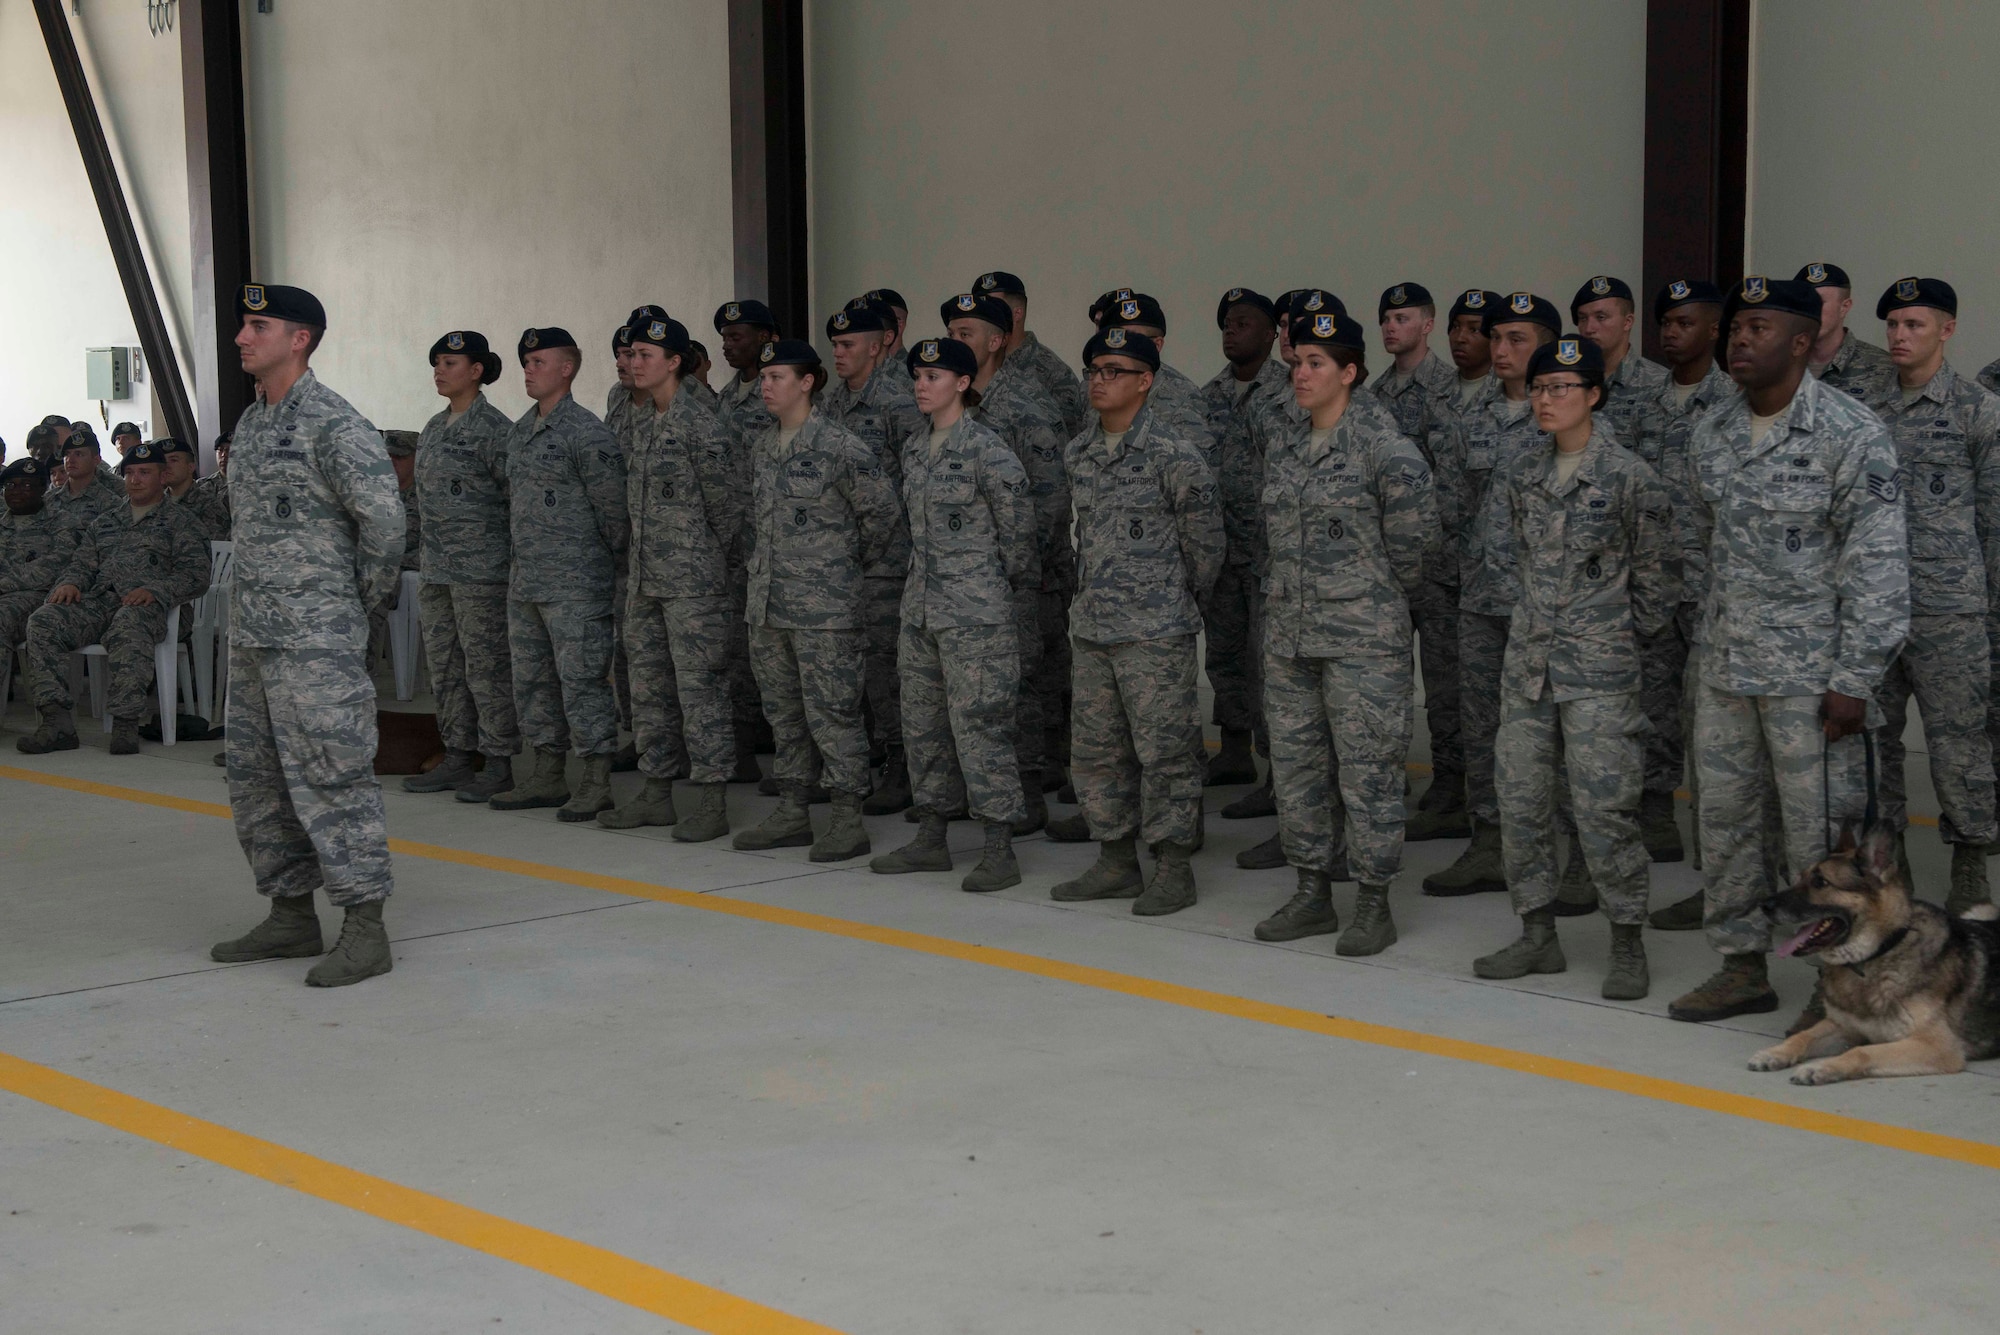 Airmen of the 39th Security Forces Squadron stand in formation during the 39th SFS change of command ceremony June 24, 2016, at Incirlik Air Base, Turkey. SFS members are responsible for the protection of base members and assets. (U.S. Air Force photo by Senior Airman John Nieves Camacho/Released)